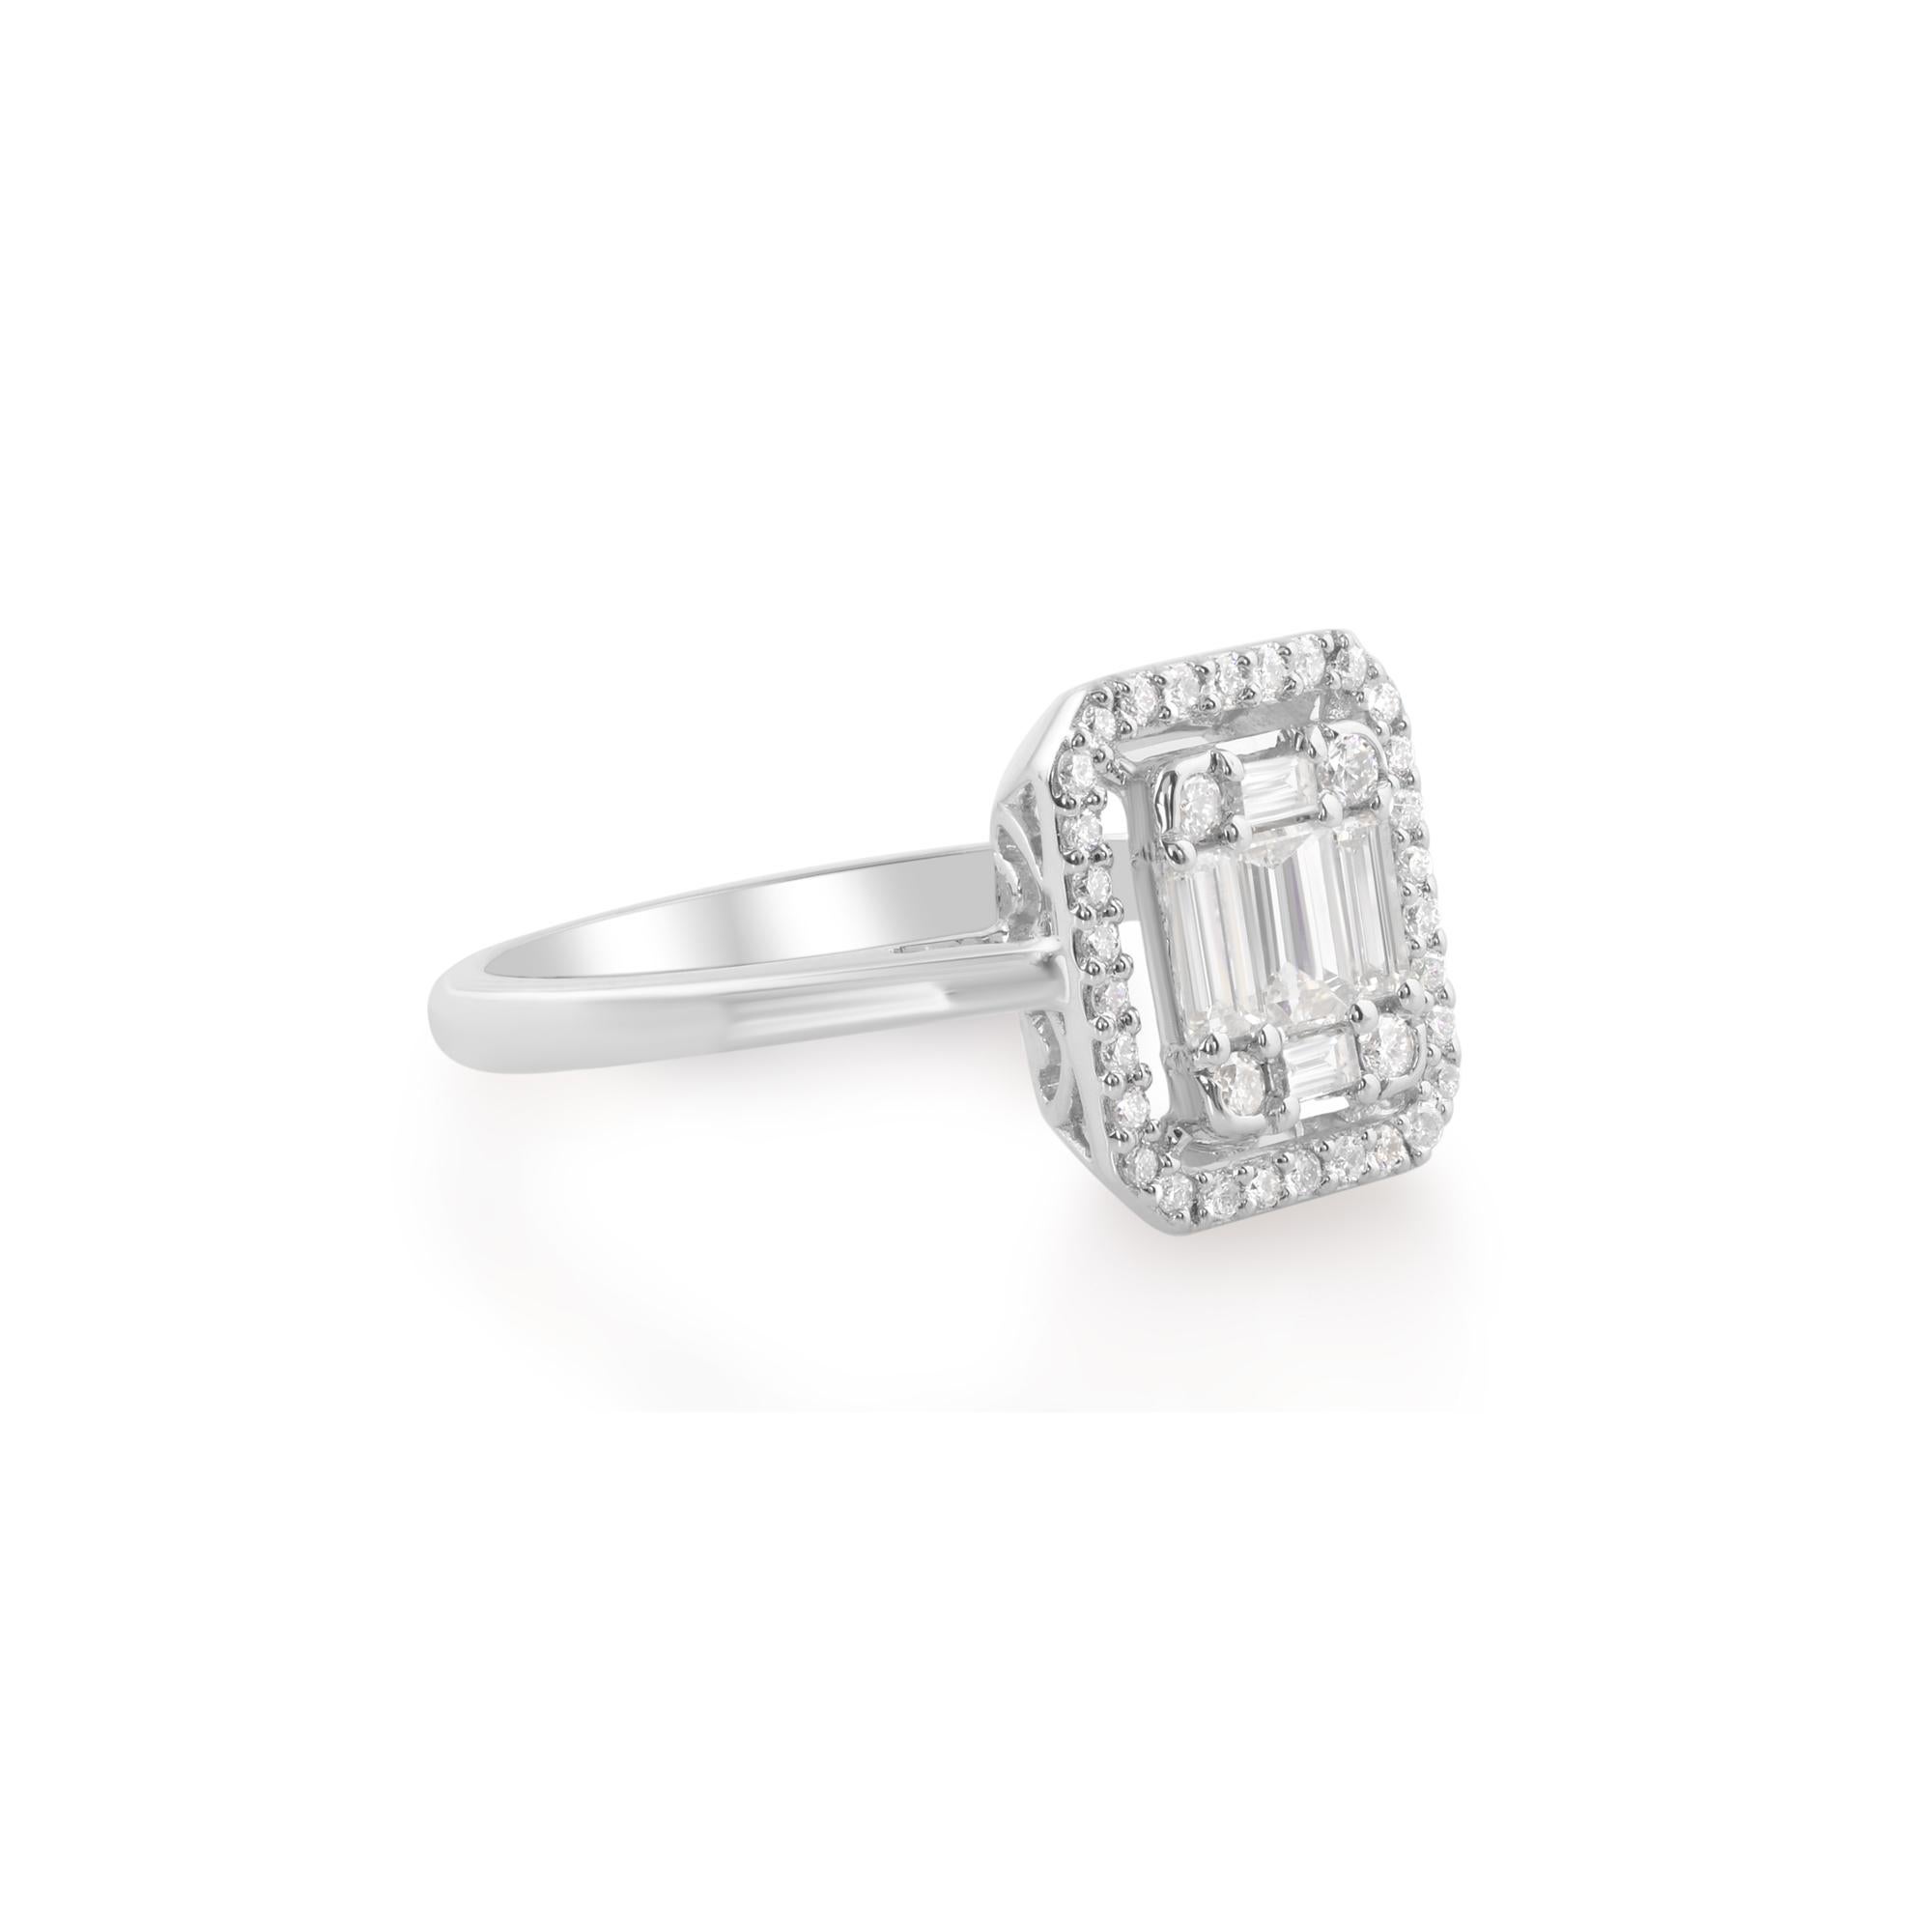 Every aspect of this ring reflects the artisanal excellence and attention to detail that defines handmade jewelry. From the precisely sculpted band to the secure setting of the diamond, each element is carefully crafted to perfection, ensuring not